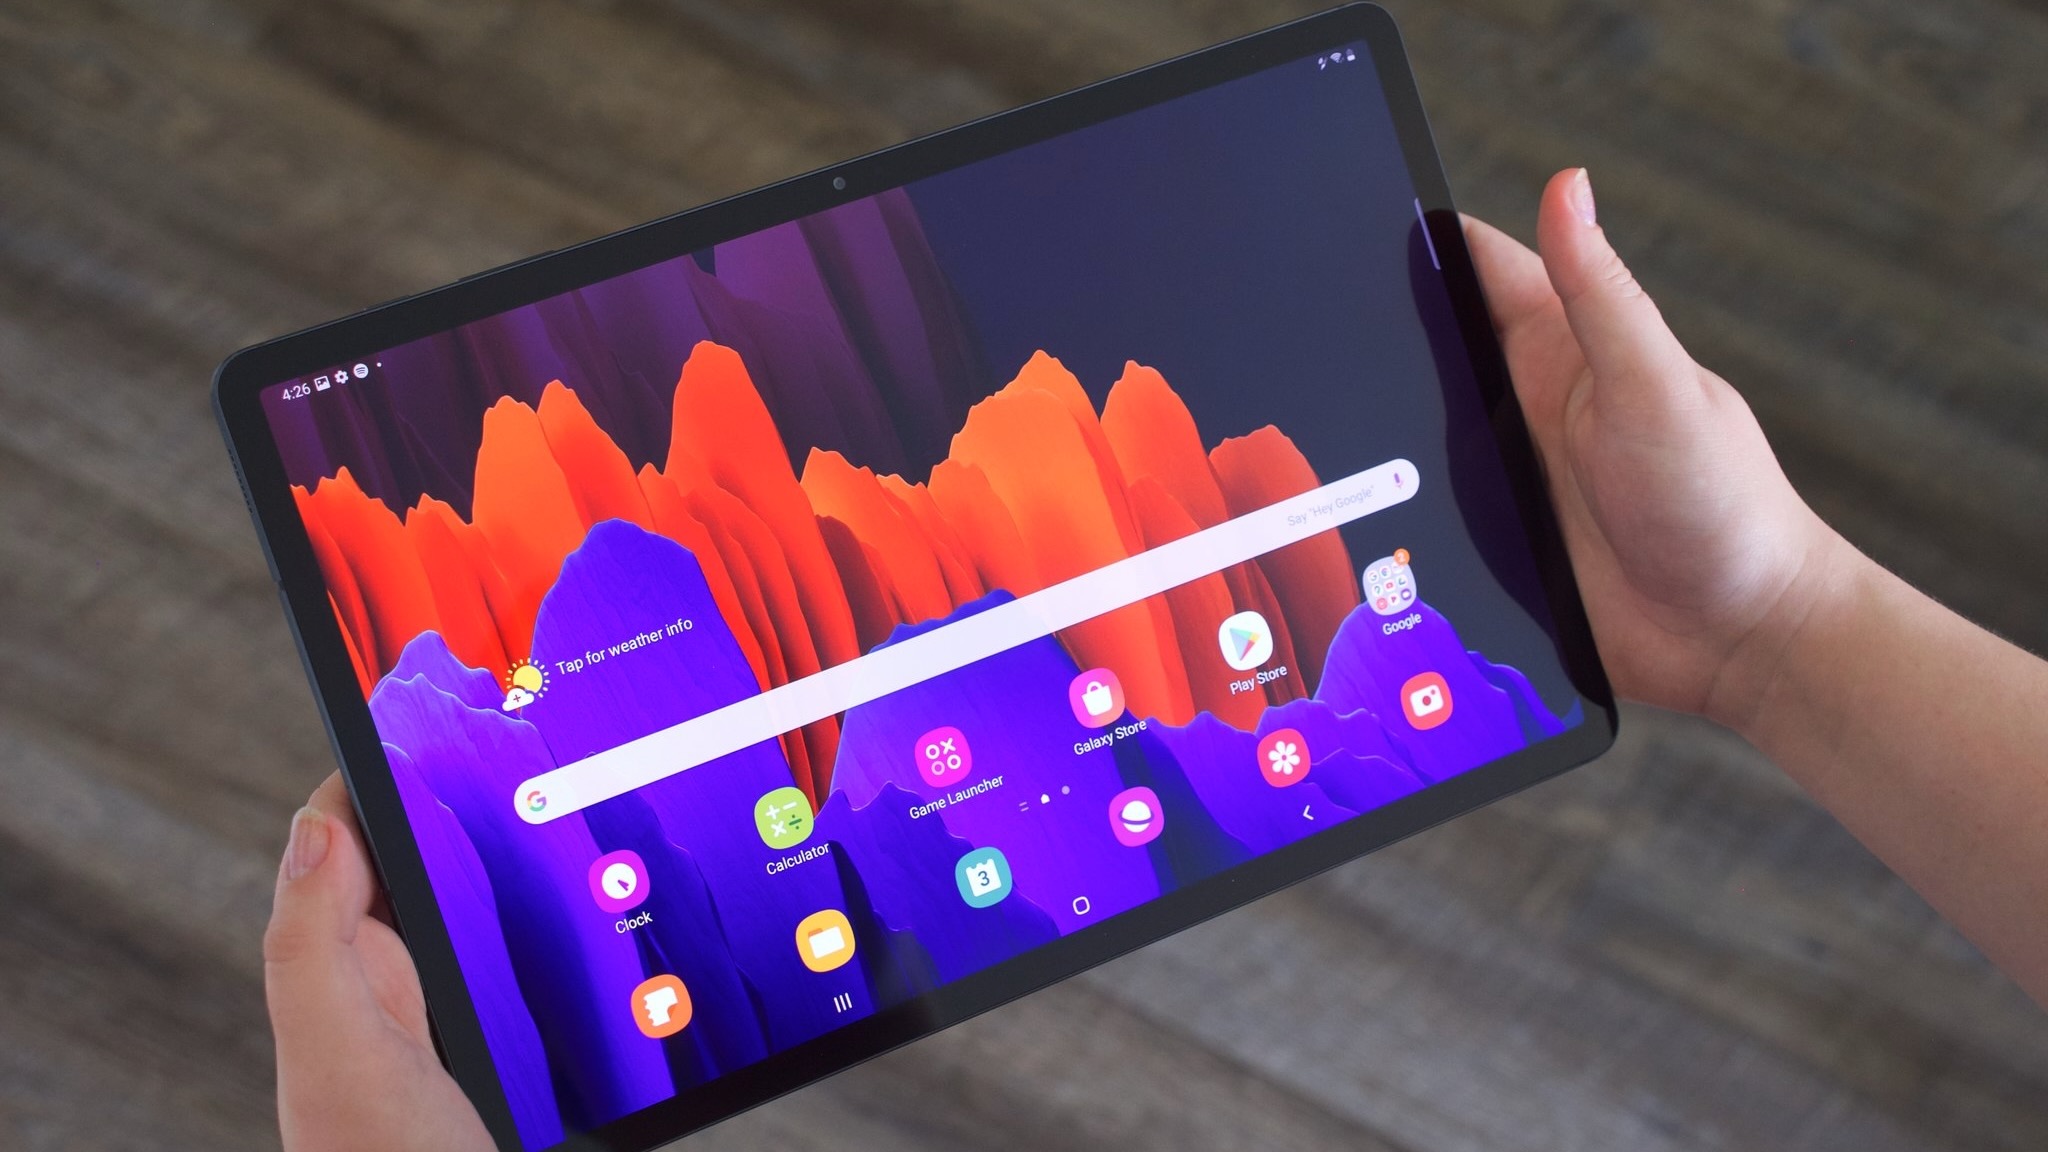 Holding the Samsung Galaxy Tab S7 Plus in a two-handed grip